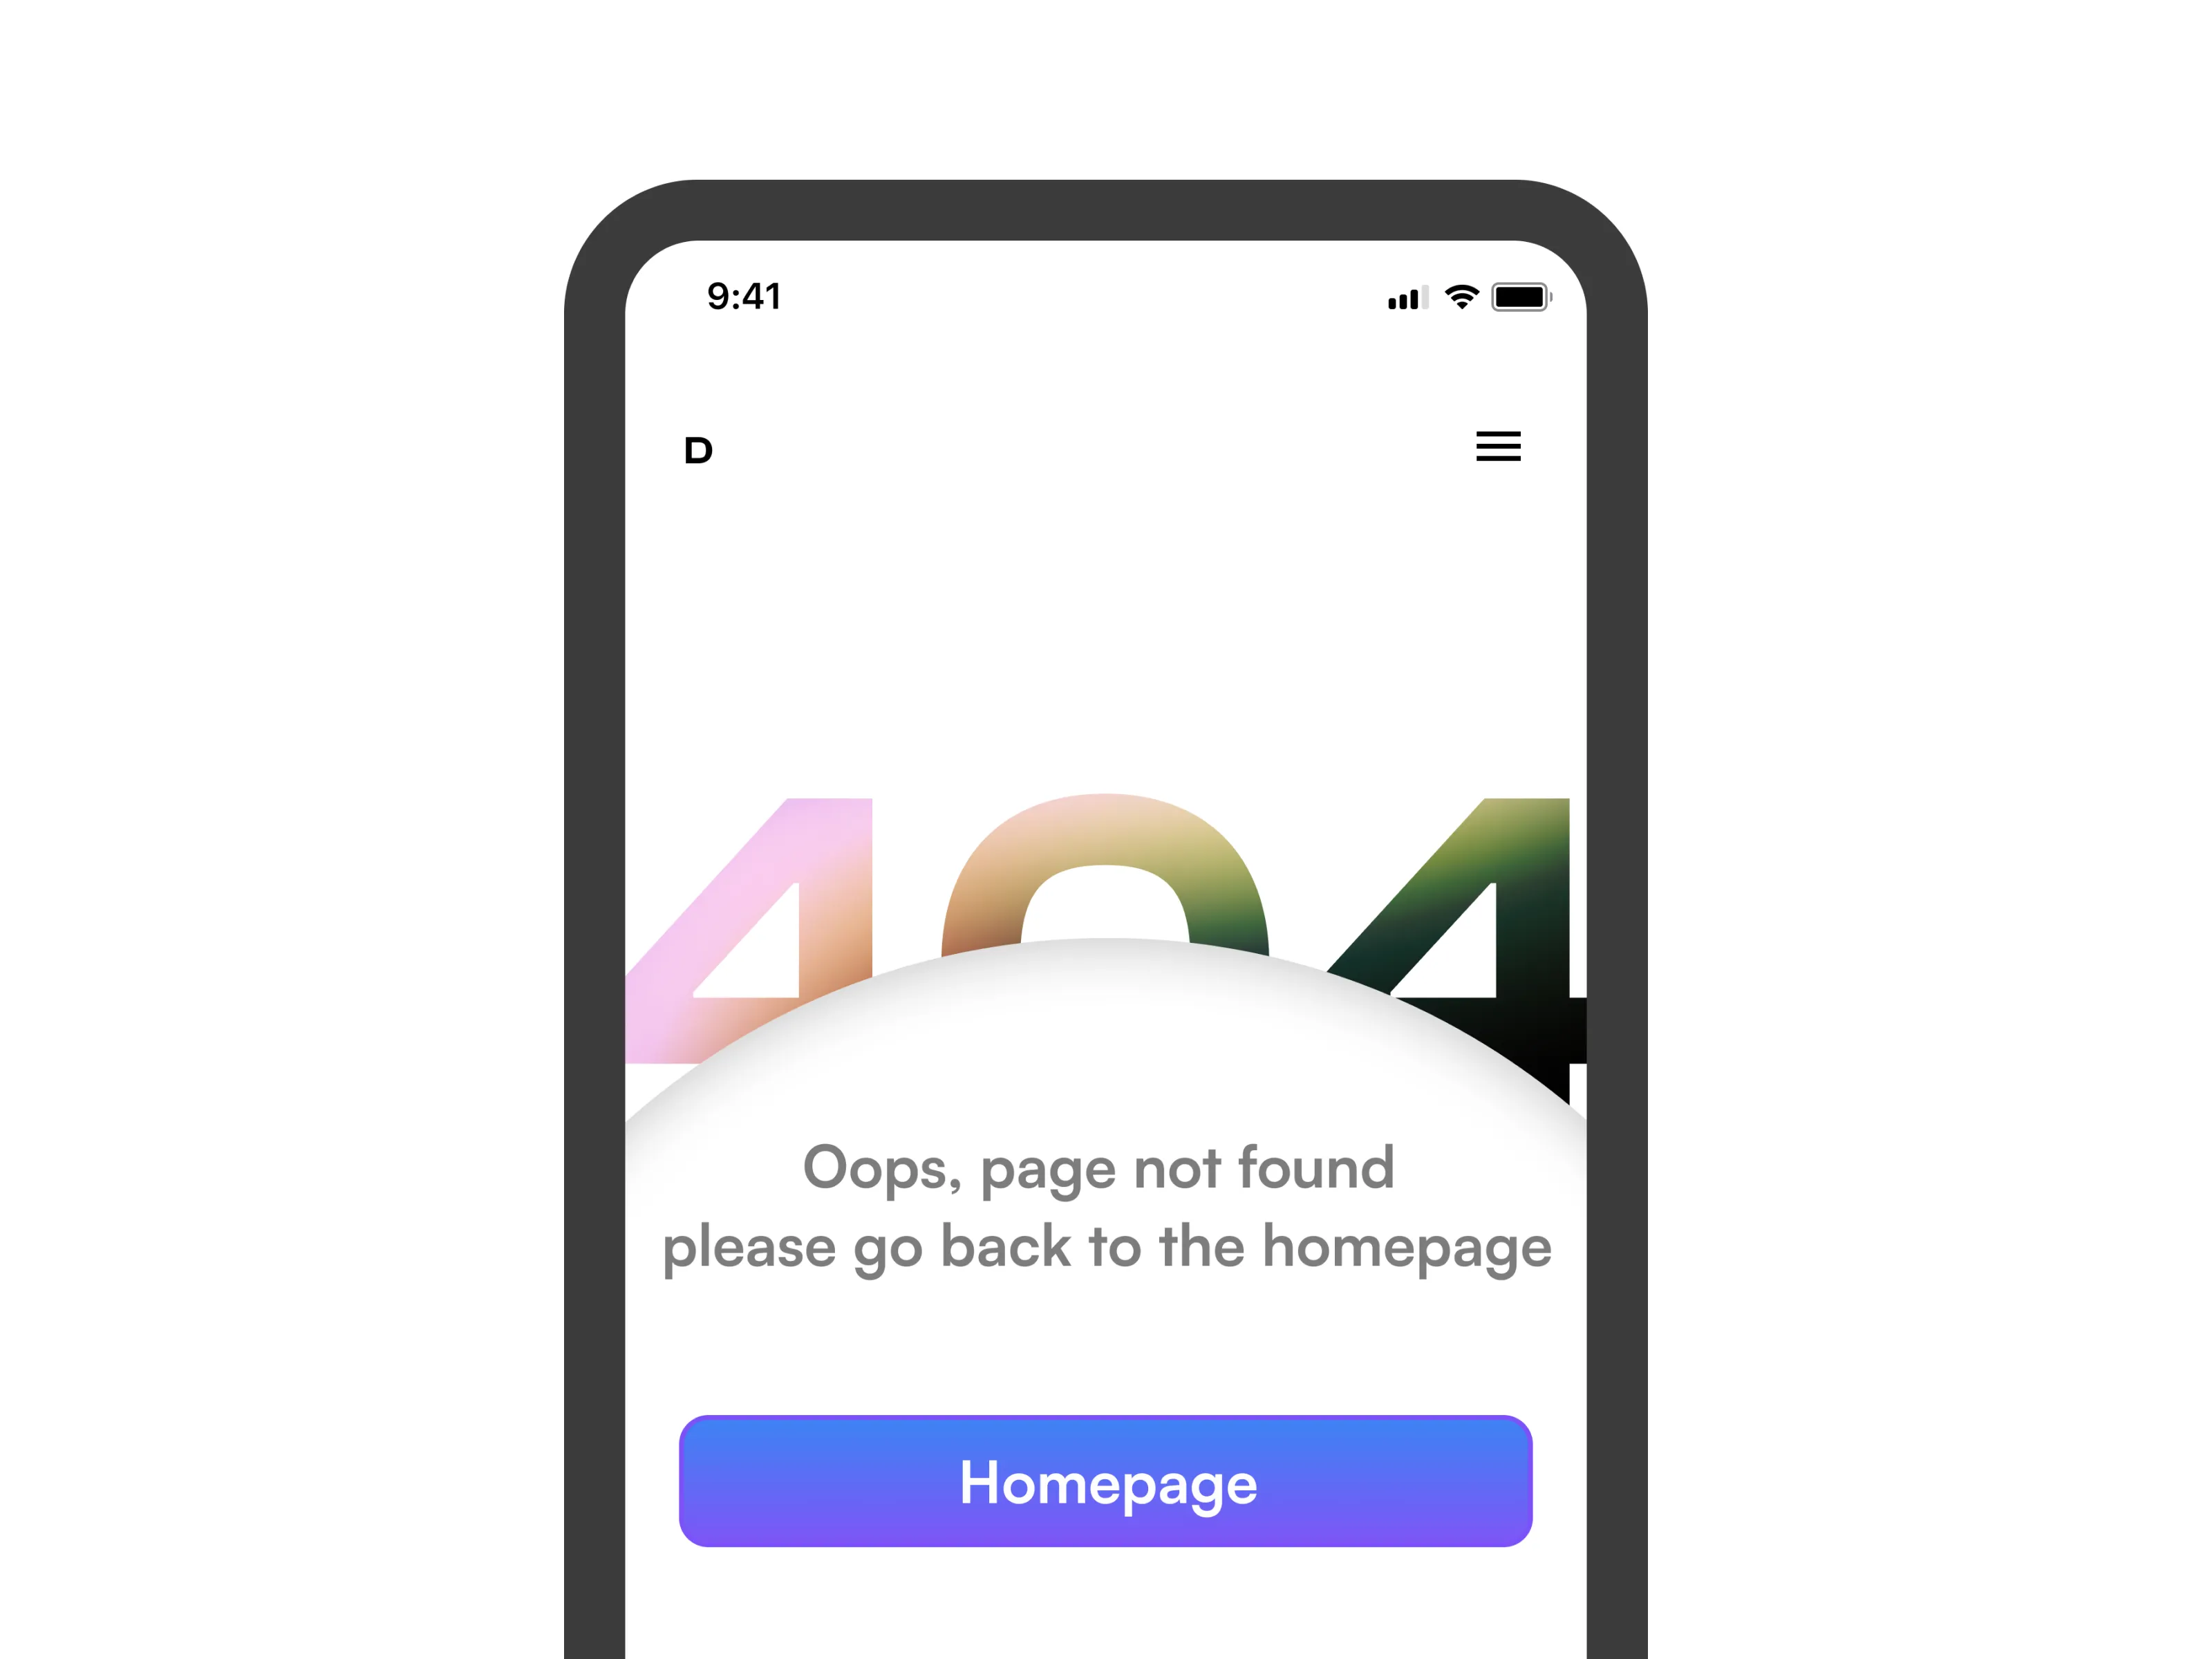 A mobile chrome with a website design in it. The page has a massive 404 with a curved content container overlaying it.
The content reads "Oops, page not found please go back to the homepage". This is followed by a gradient purple button, labeled "Homepage".